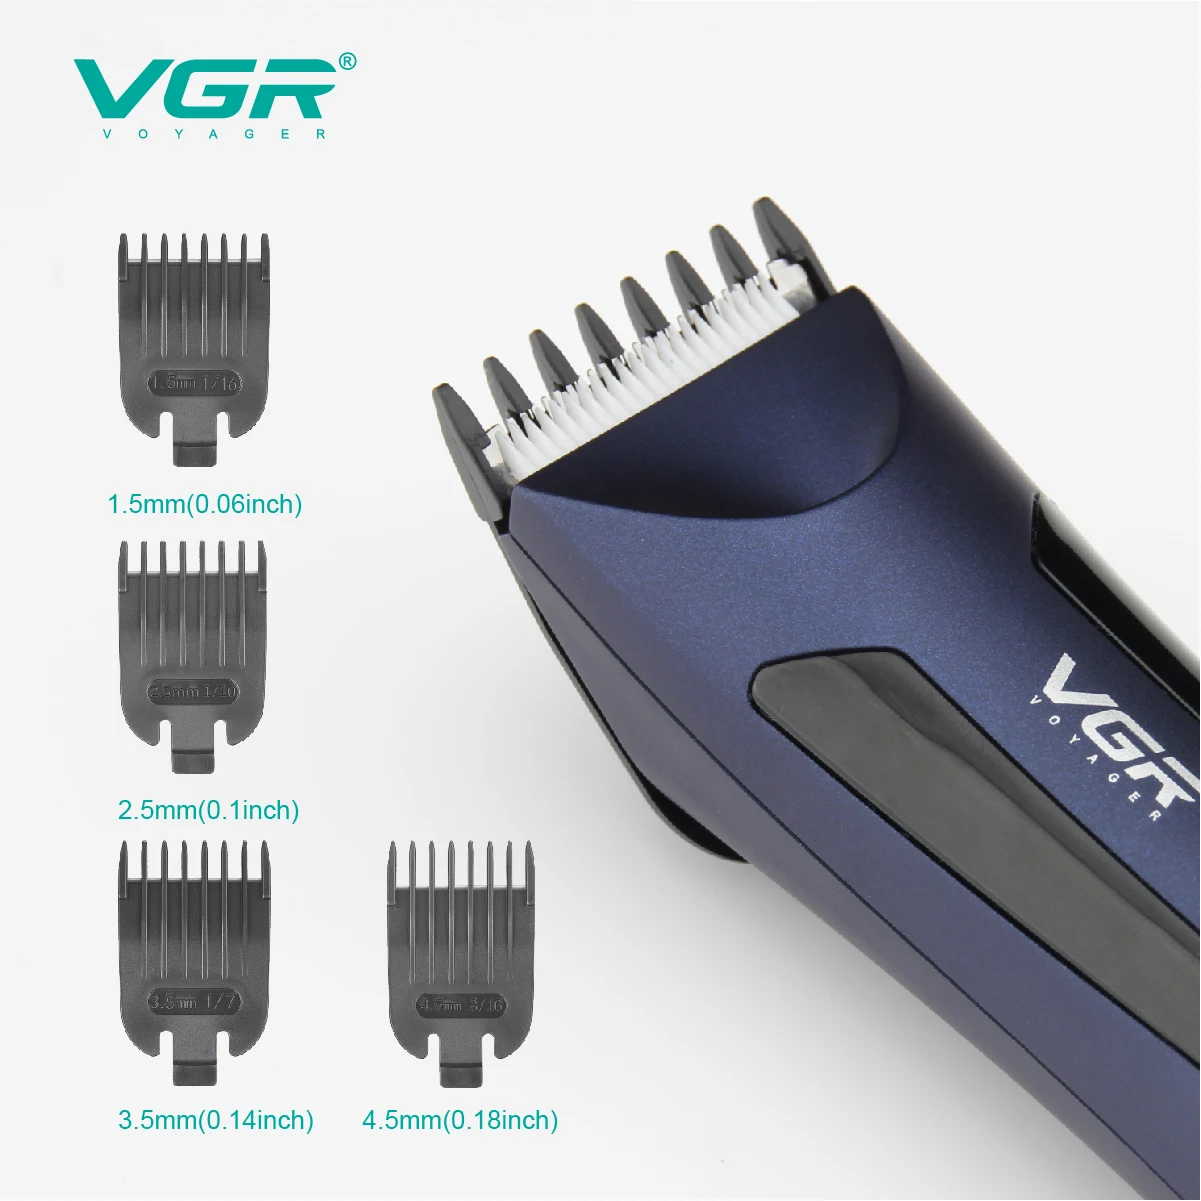 VGR Hair Trimmer Professional Hair Clipper Barber Hair Cutting Machine Cordless Electri Rechargeable Beard Trimmer for Men V-951 enlarge